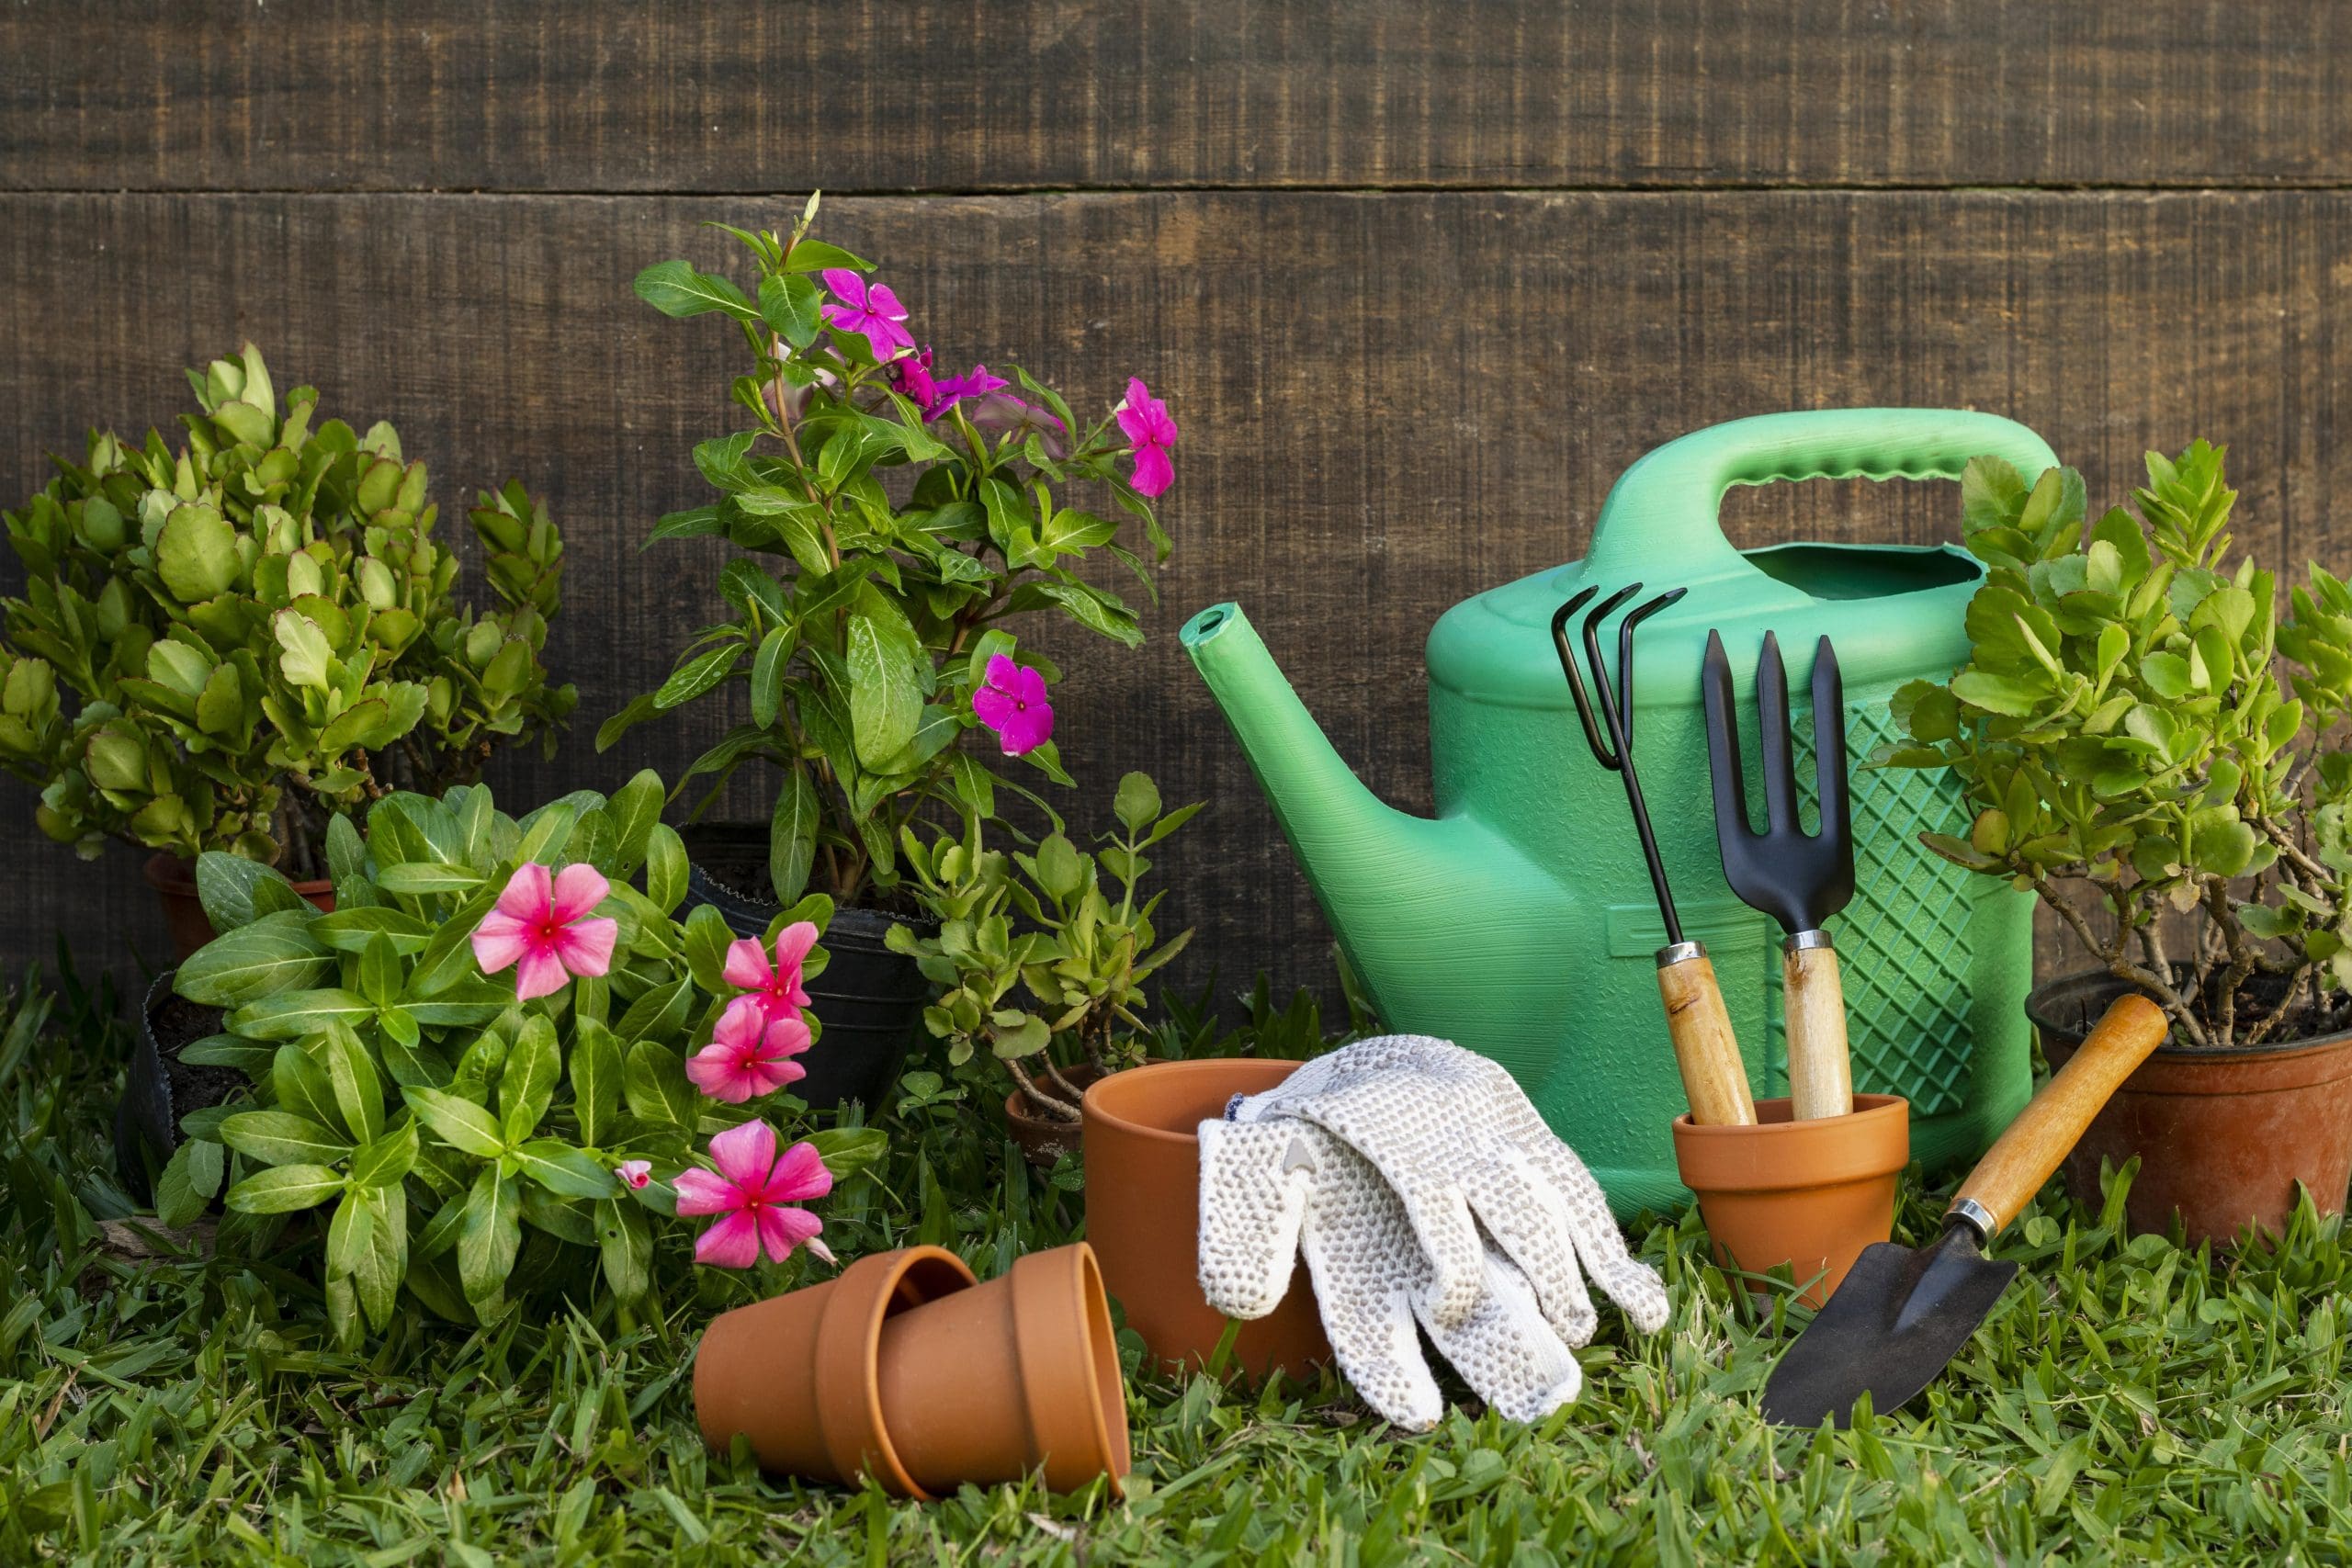 Gardening Tools for Prepping Your Home Garden for Spring